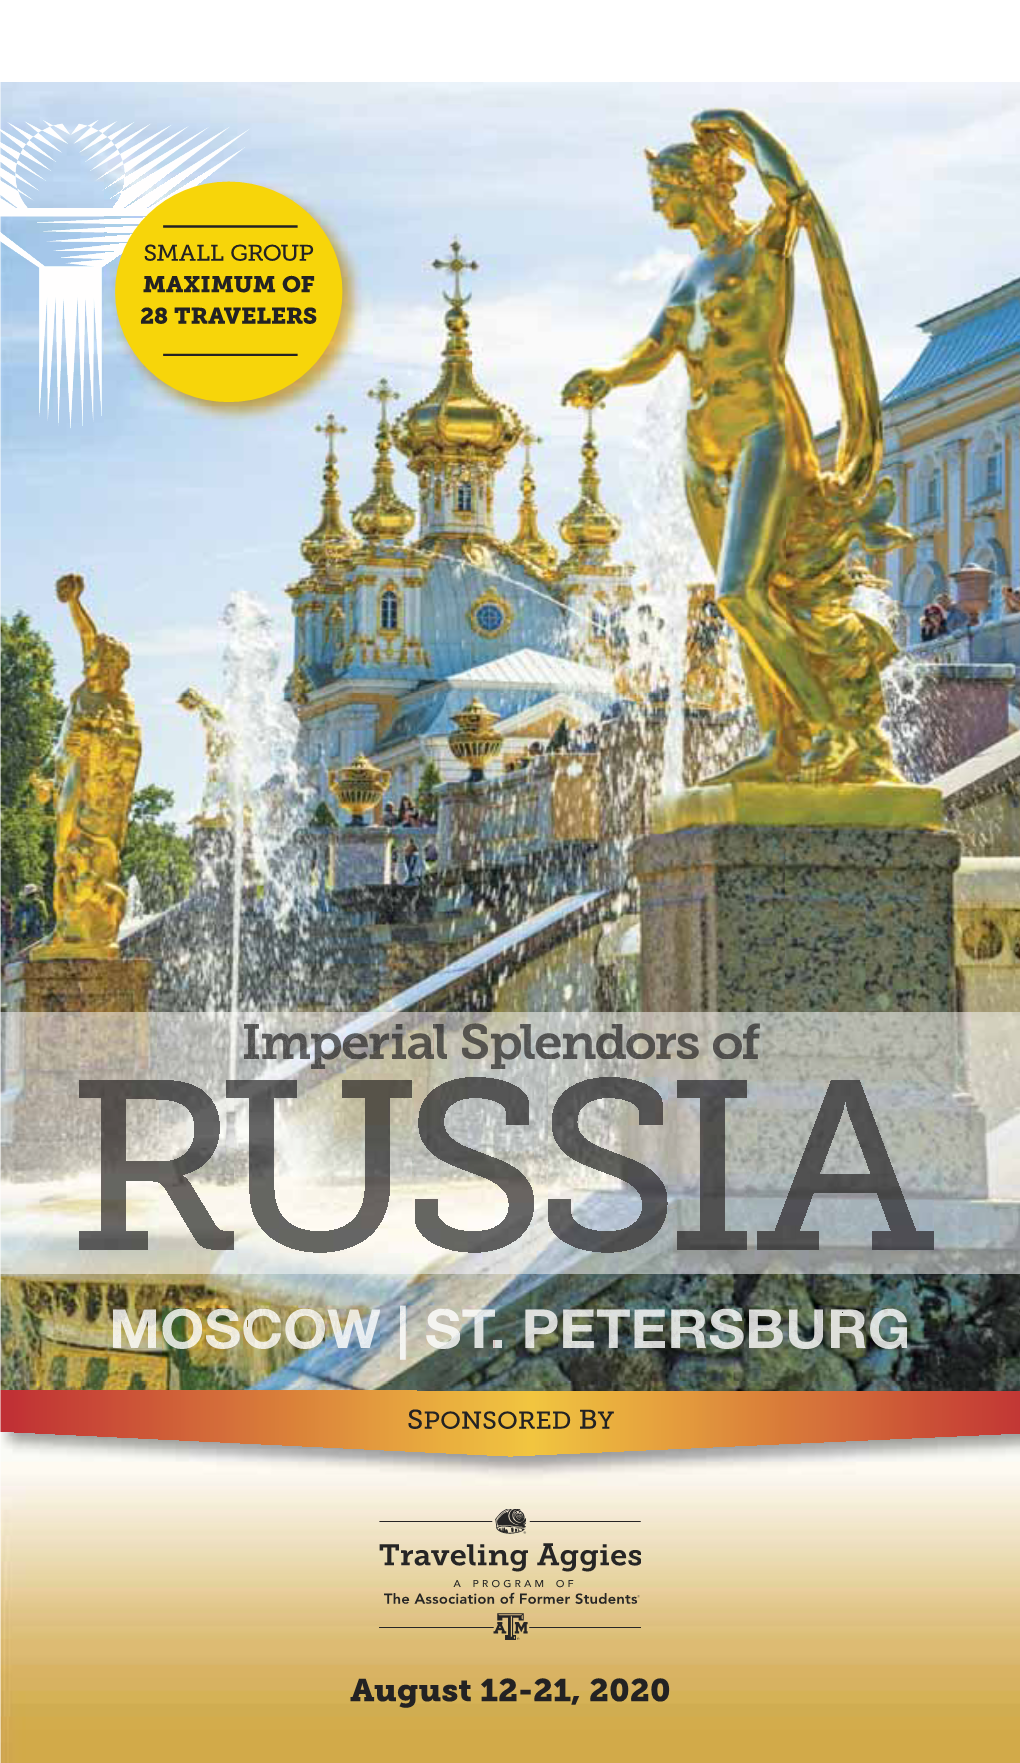 Moscow, Russia, at the ﬁrst-Class Your Insight Into the Region